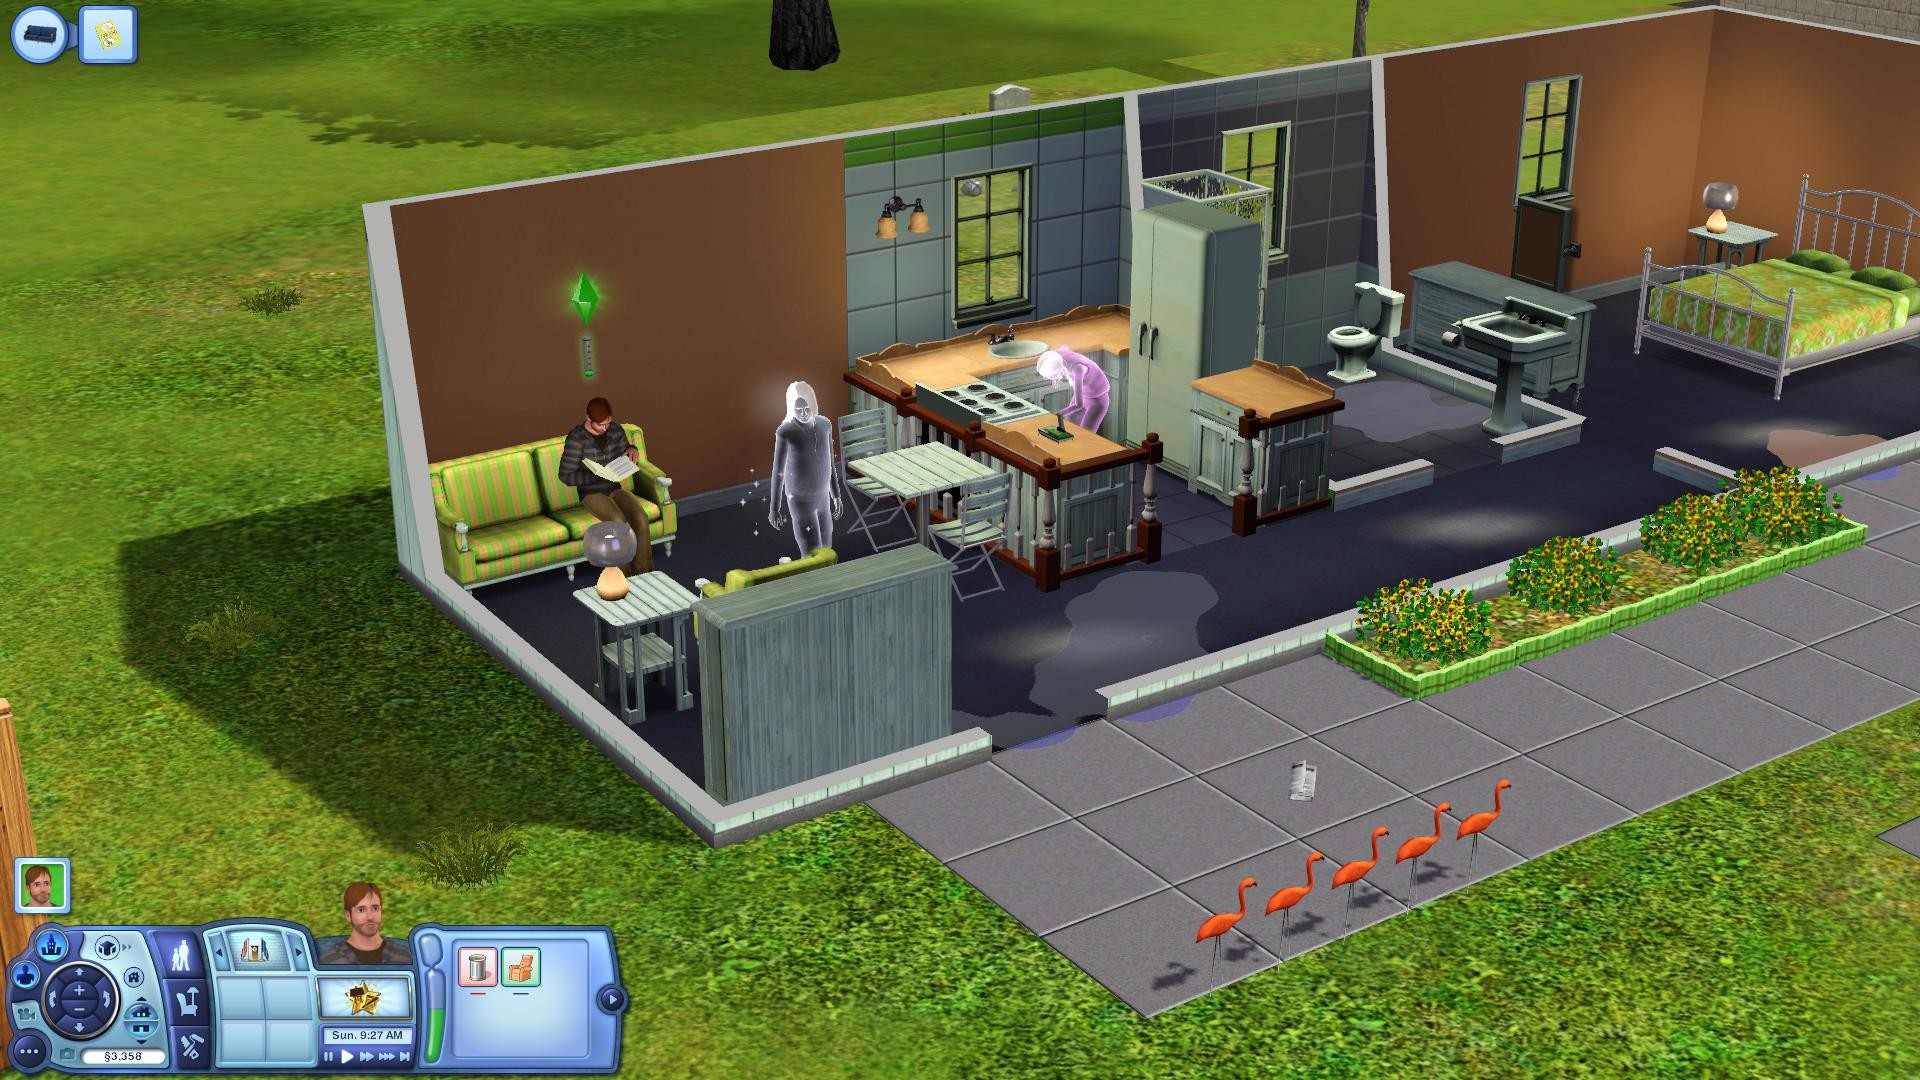 1920x1080 images sims 3 pets | The Sims 3: Pets Screenshot for Xbox 360 .